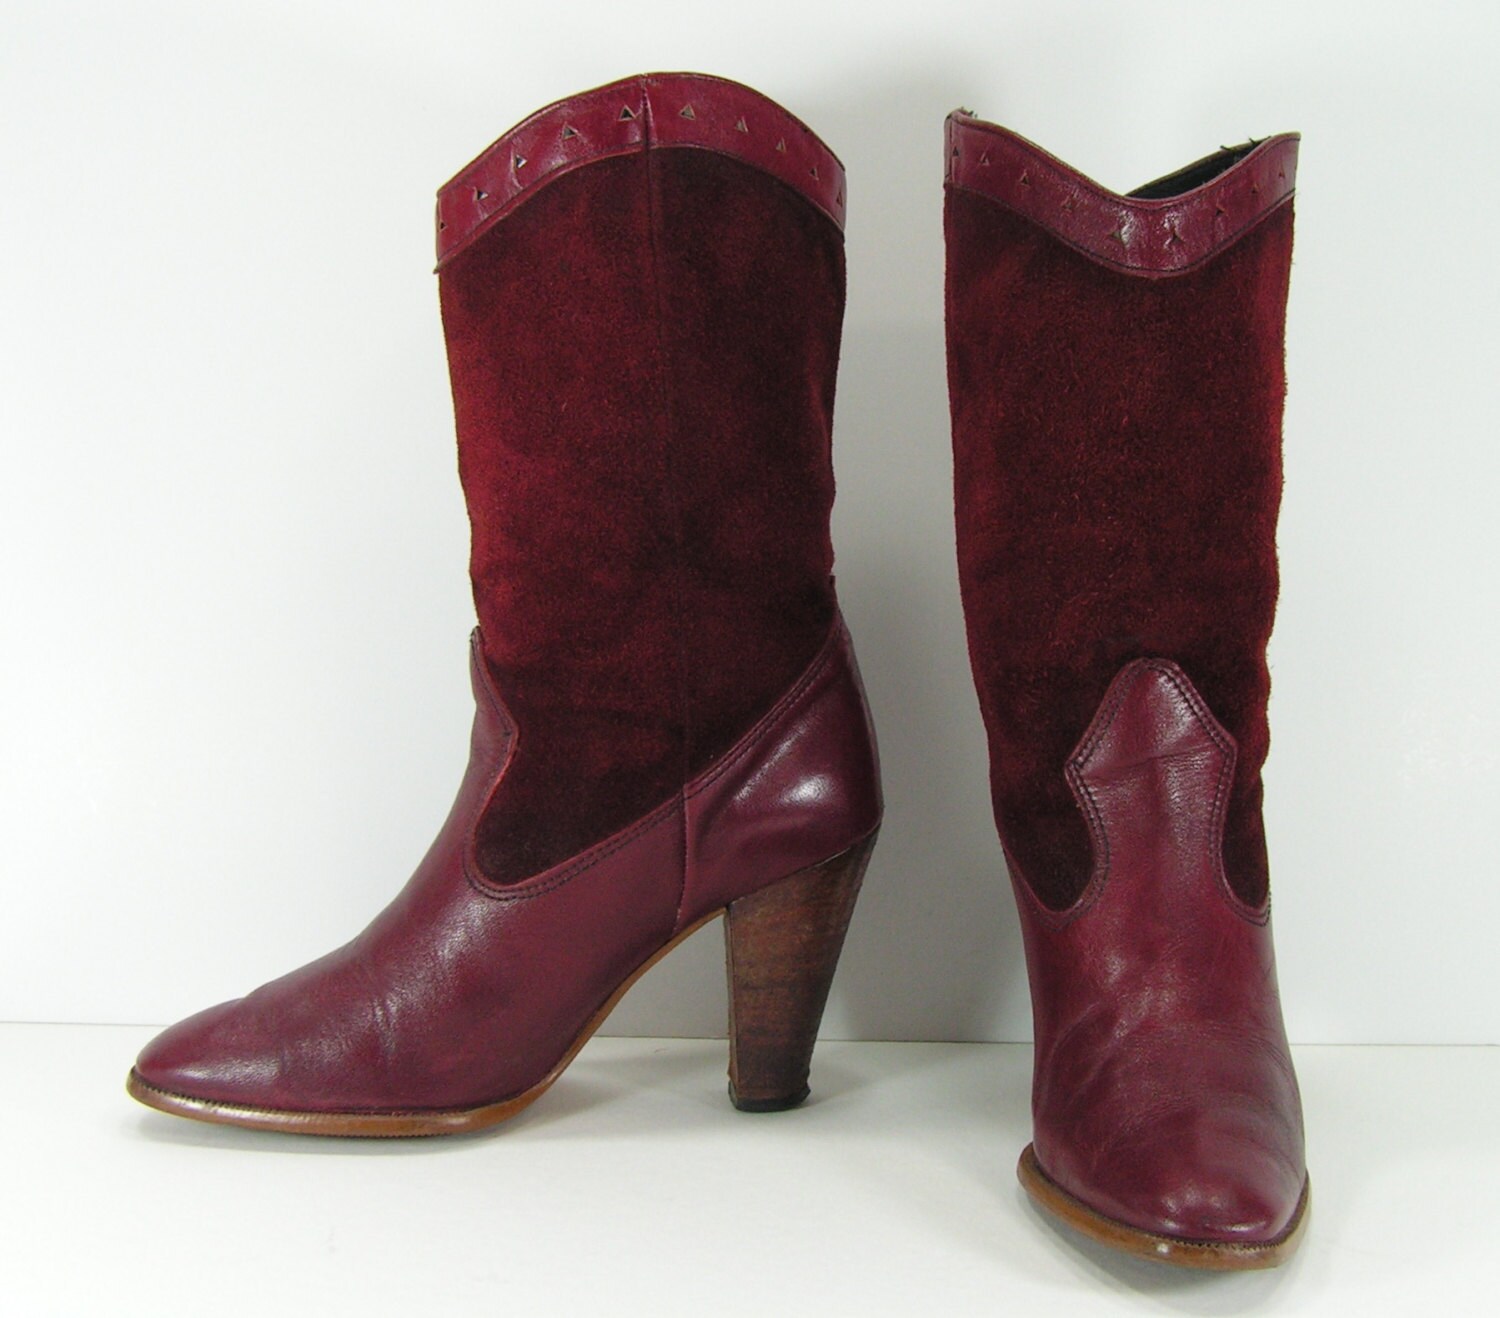 vintage cowboy boots womens 6 b m burgundy suede leather high